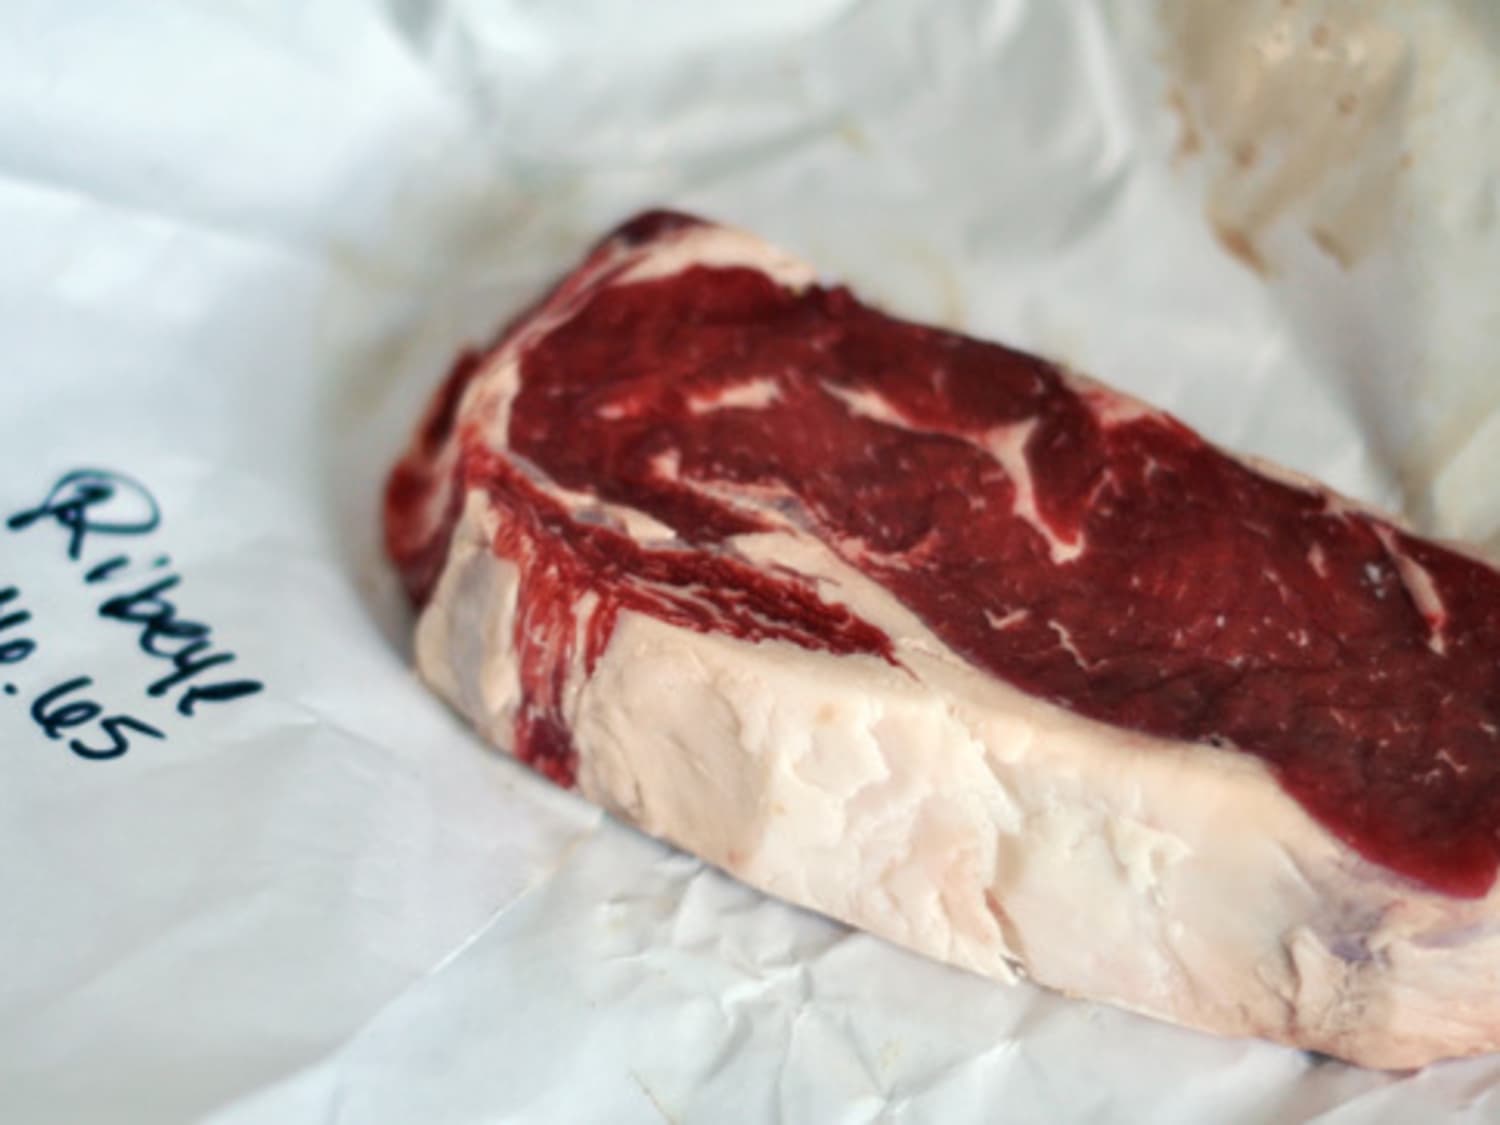 Is It Safe To Store Fresh Meat In Its Original Butcher Paper Wrapping?